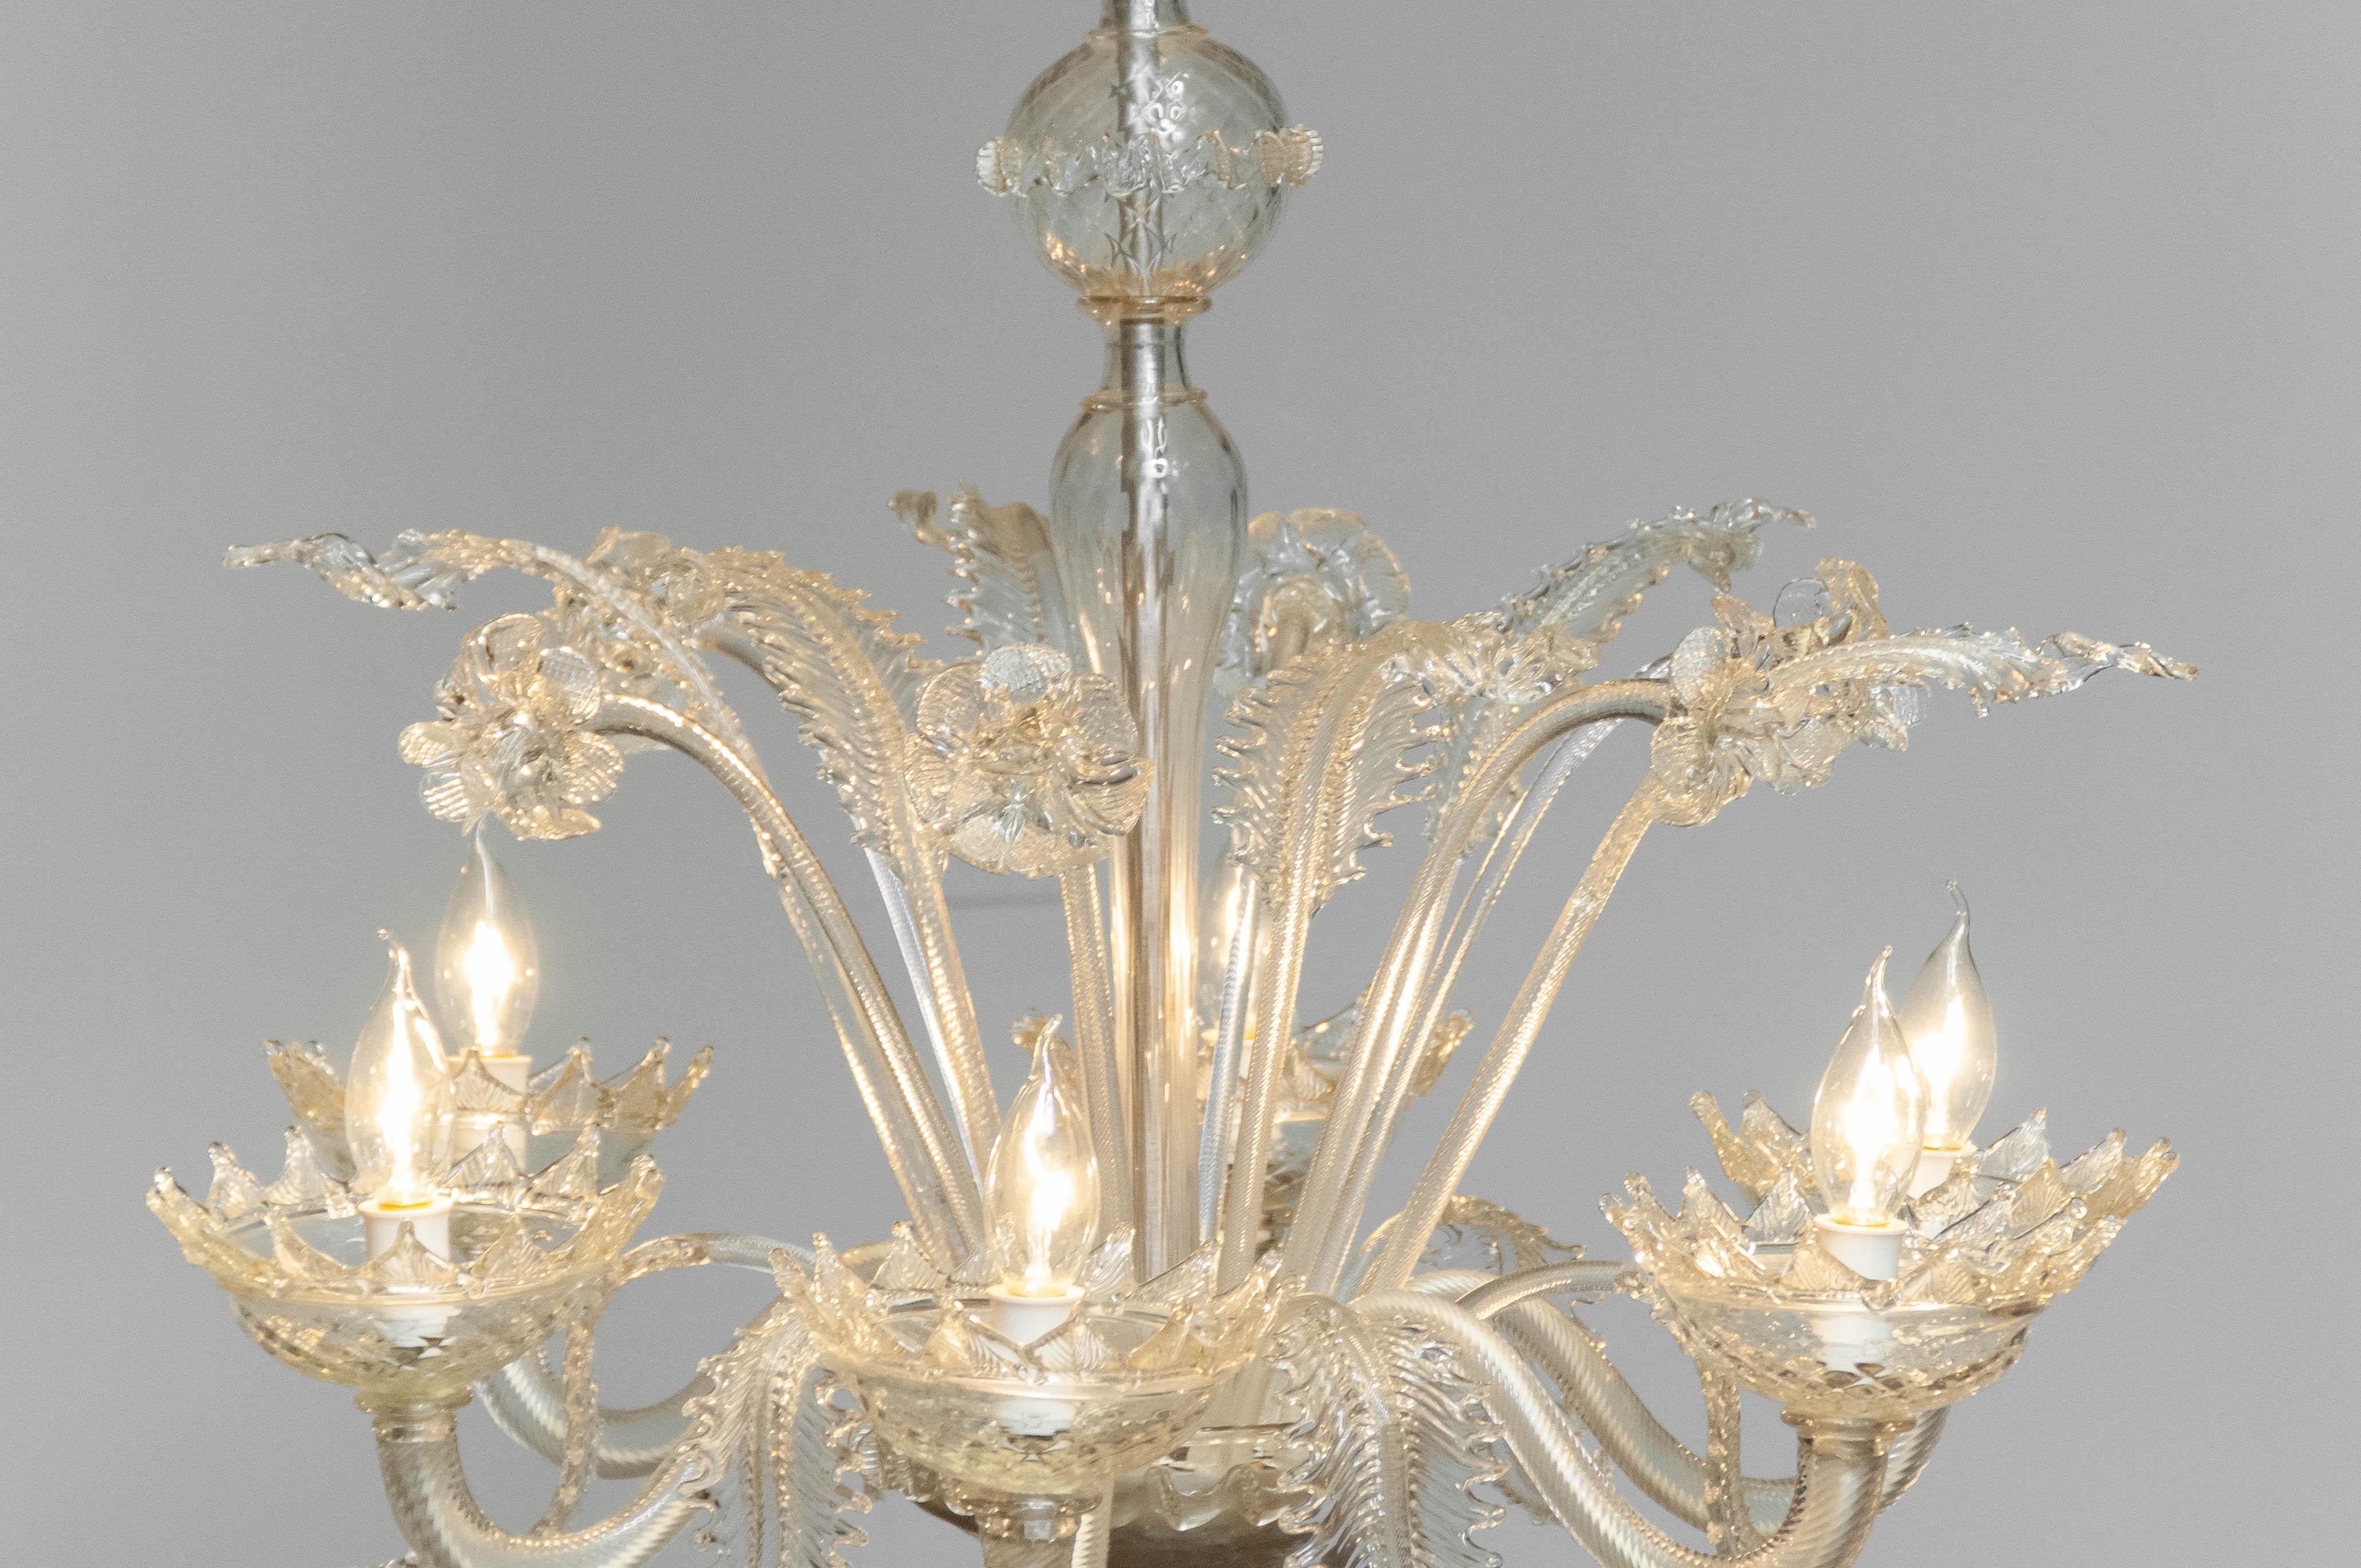 1940's Large Clear Art Glass Murano Barrochi Chandelier by Barovier & Toso Italy In Good Condition For Sale In Silvolde, Gelderland